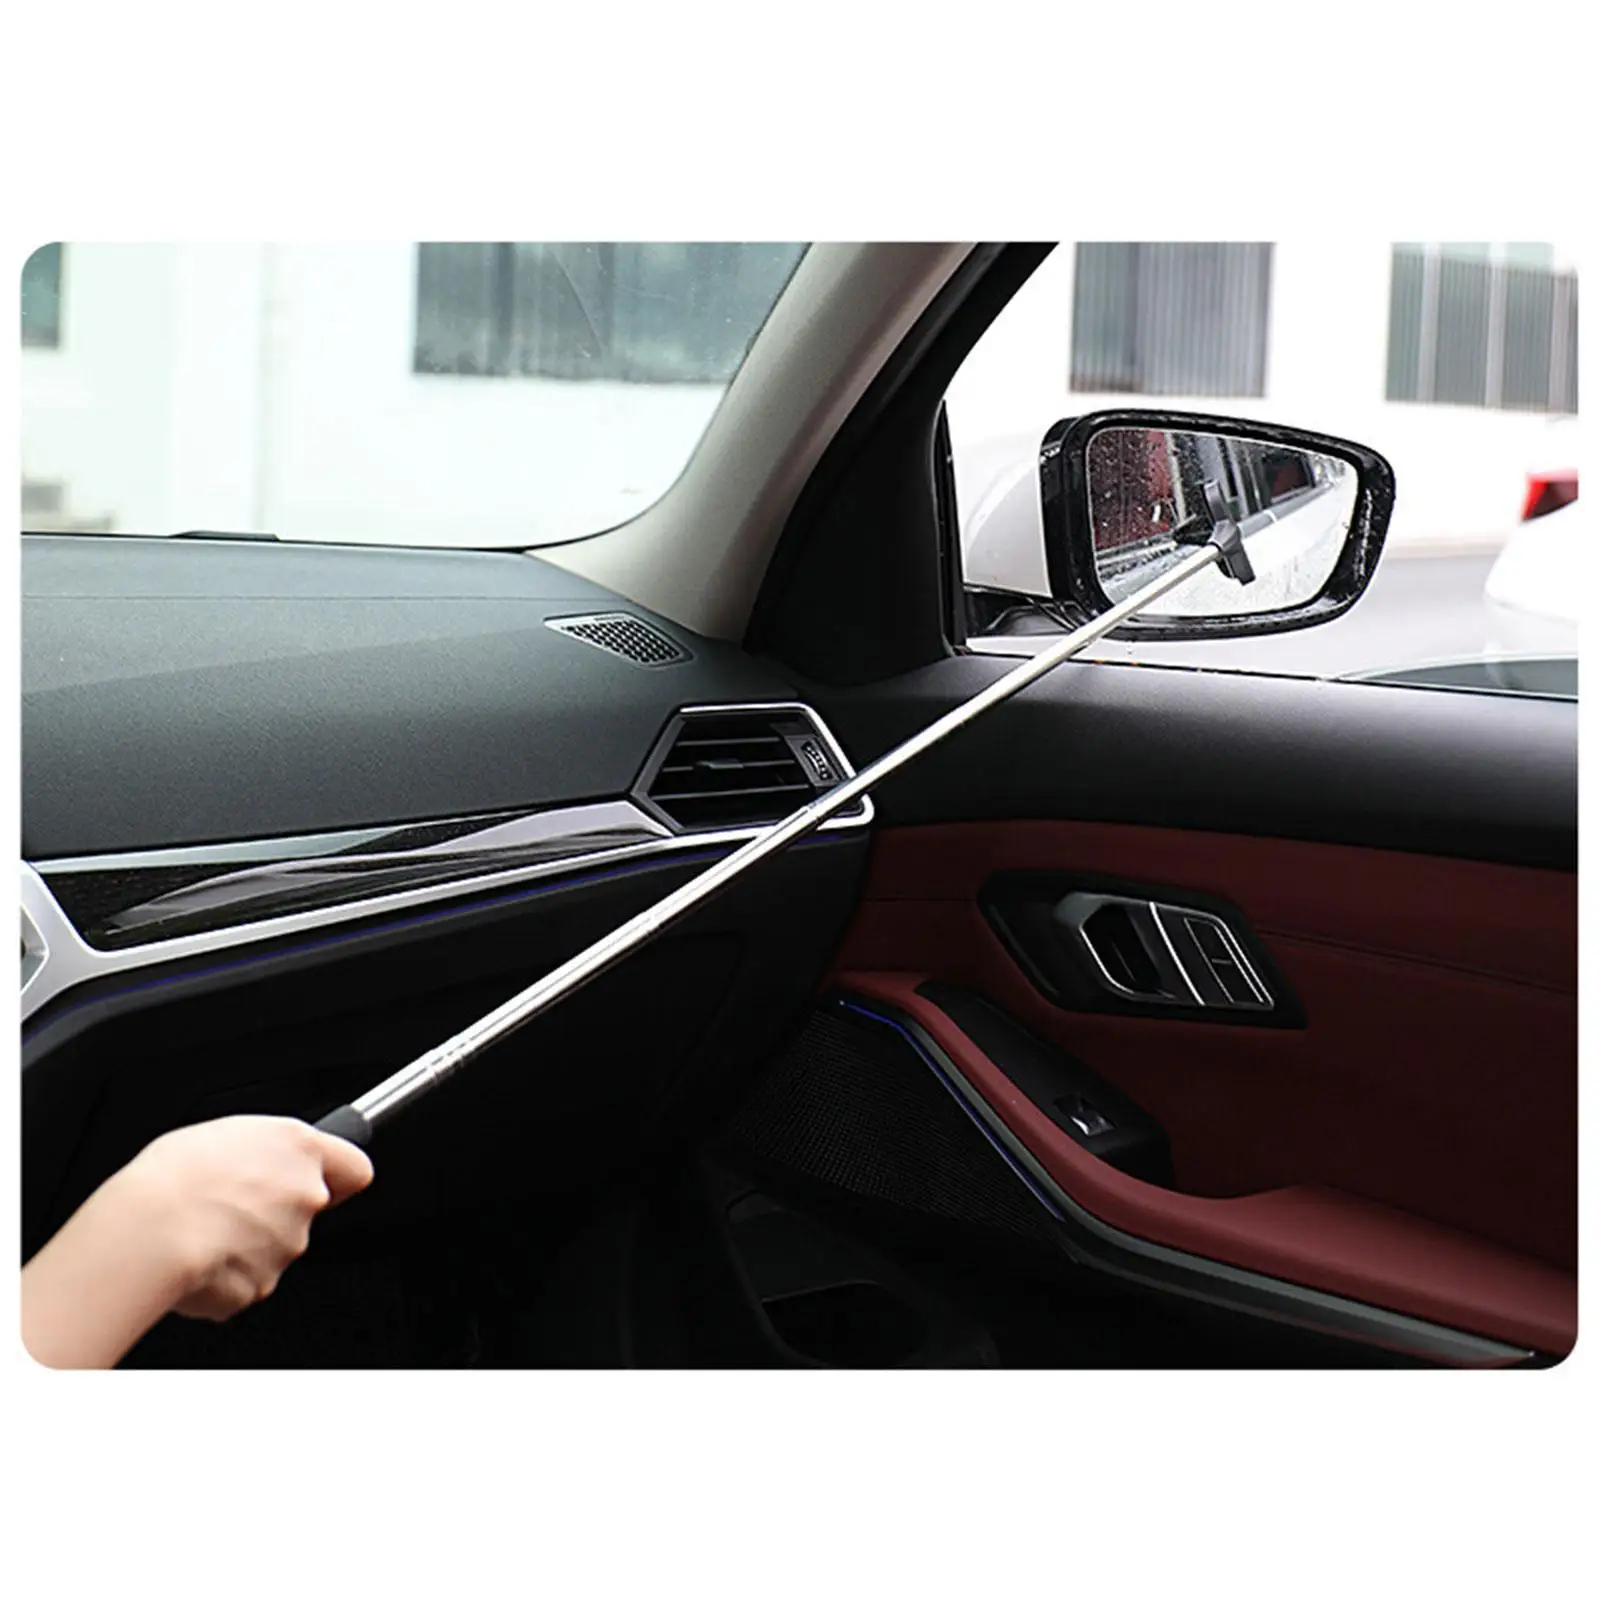 Retractable Car Rearview Mirror Wiper Snow brush to Clean Water Remover Glass Cleaner Extendable for Tiles Glass Countertops